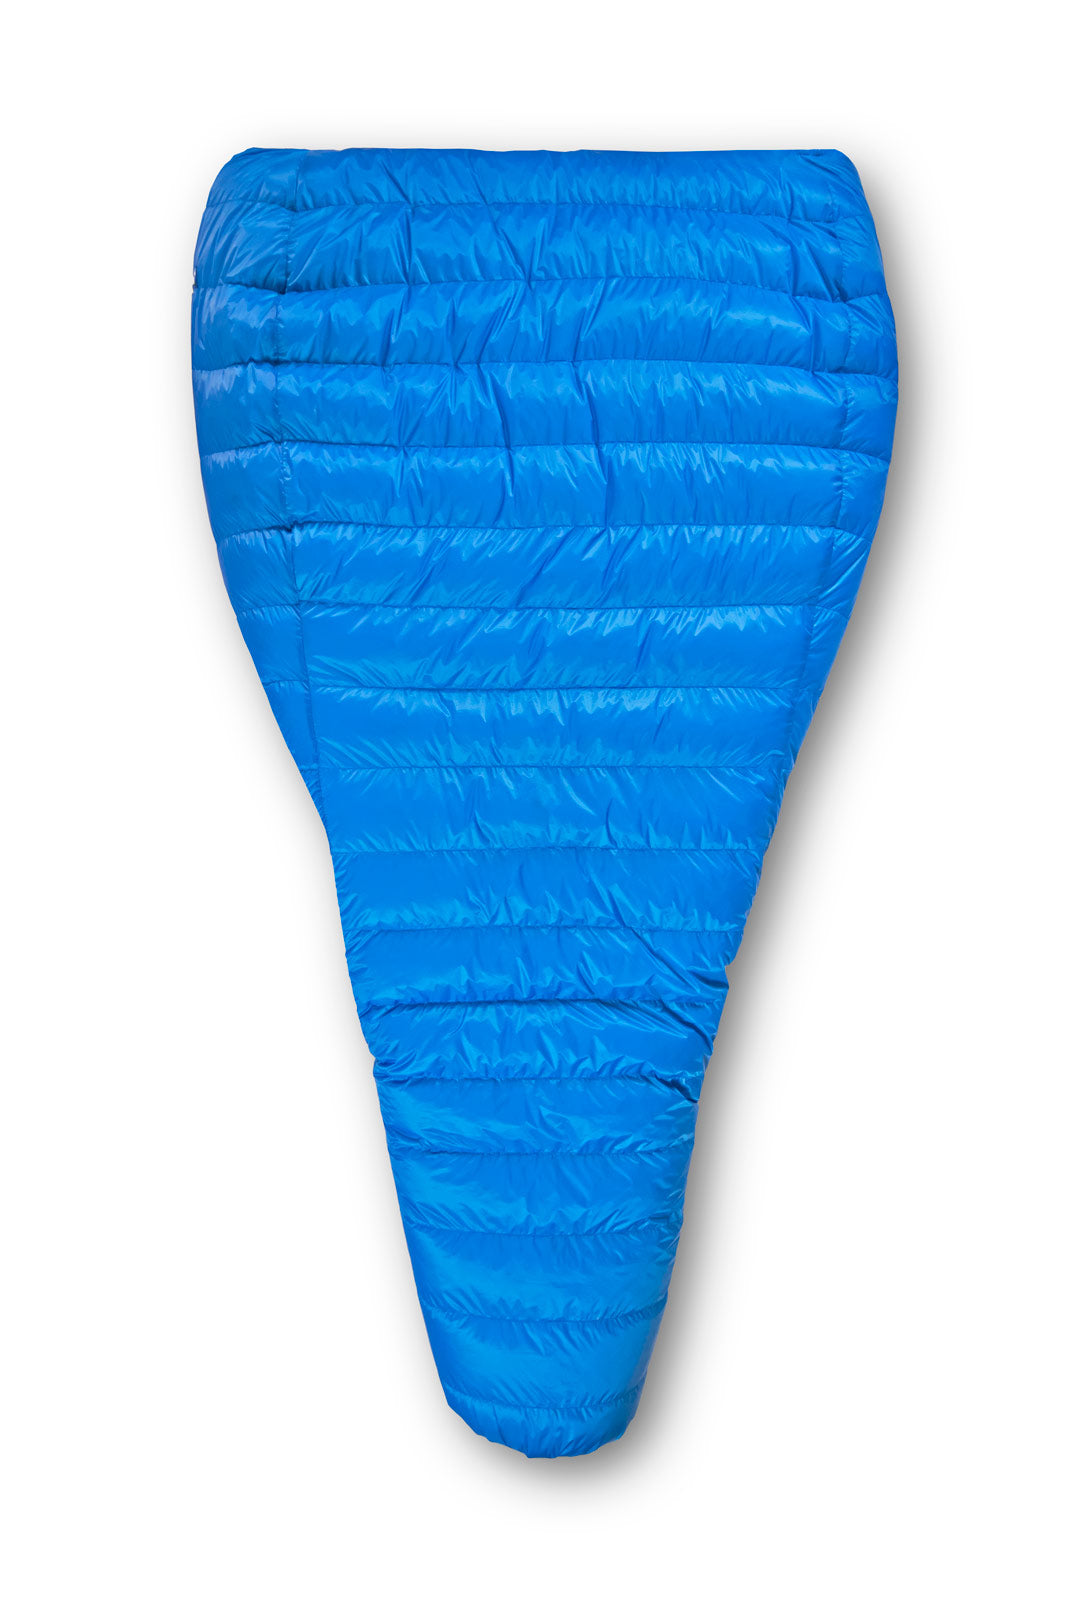 Feathered Friends Flicker UL Down Quilt Sleeping Bag Partially Unzipped Top View